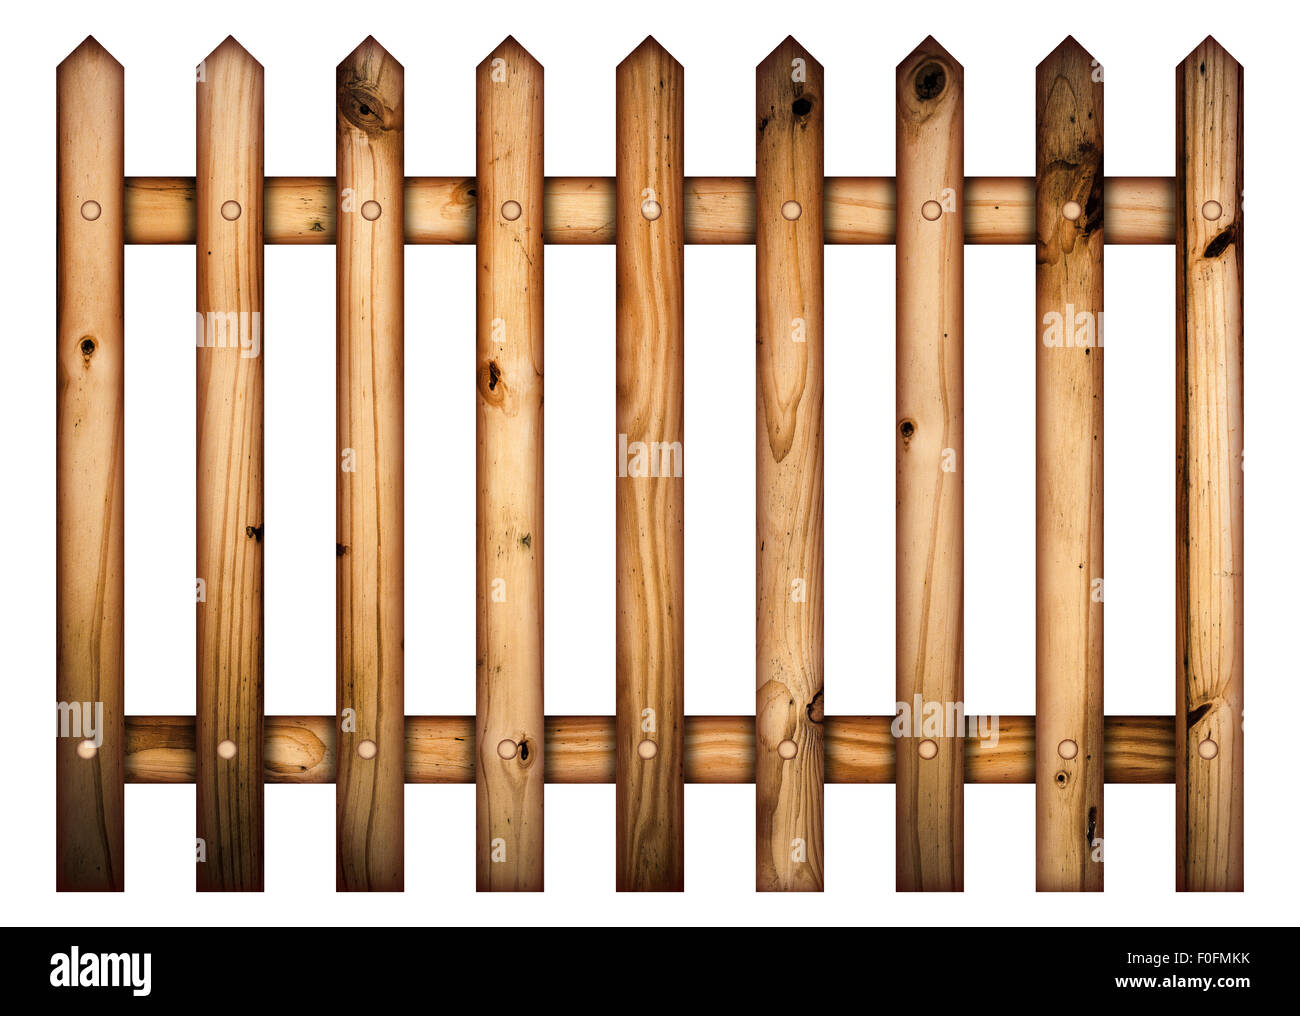 Wooden picket fence isolated on a white background. Stock Photo